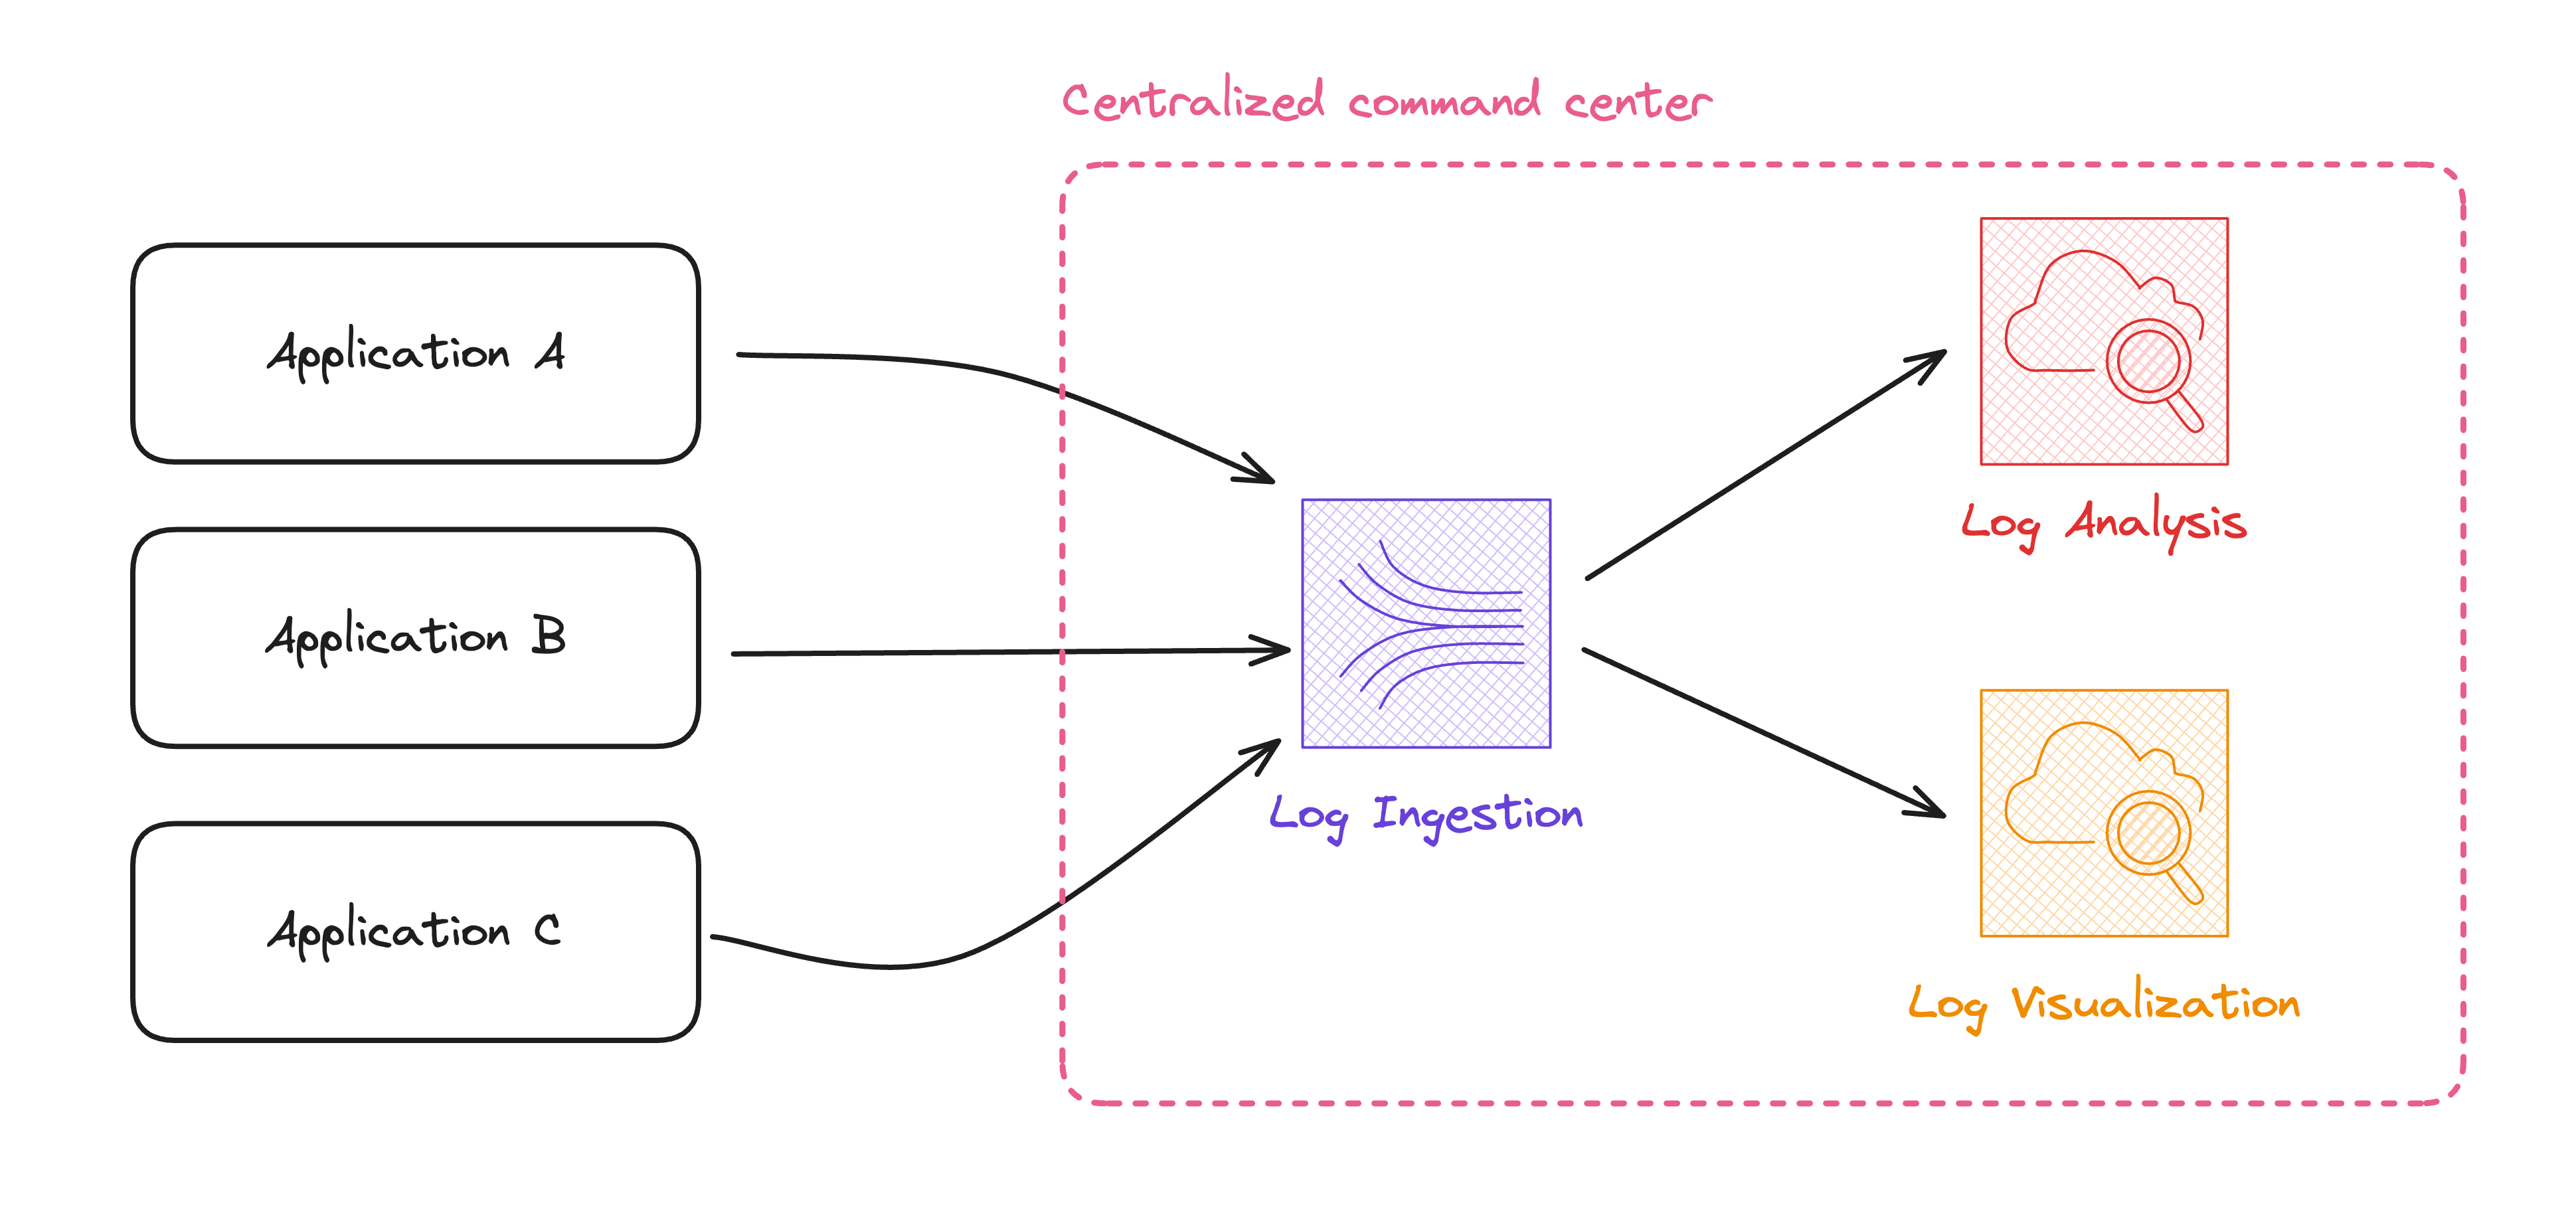 Diagram illustrating a centralized command center for log management, showing data flow from three applications (A, B, C) into a log ingestion system, which then distributes logs for analysis and visualization.